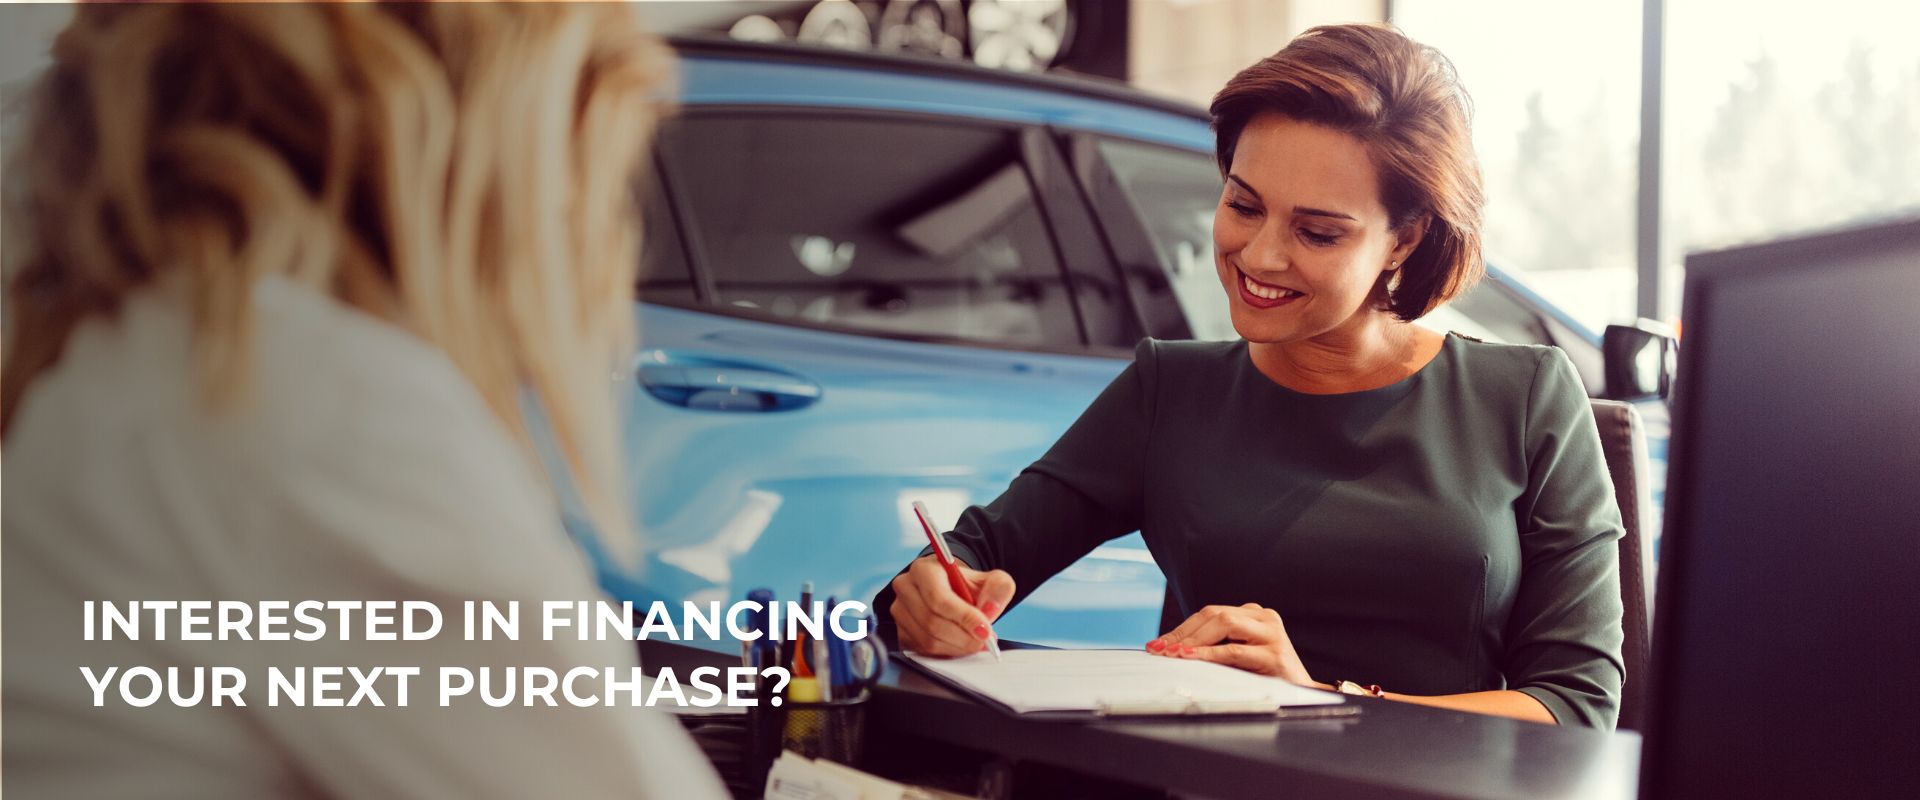 Interested in financing your next purchase?